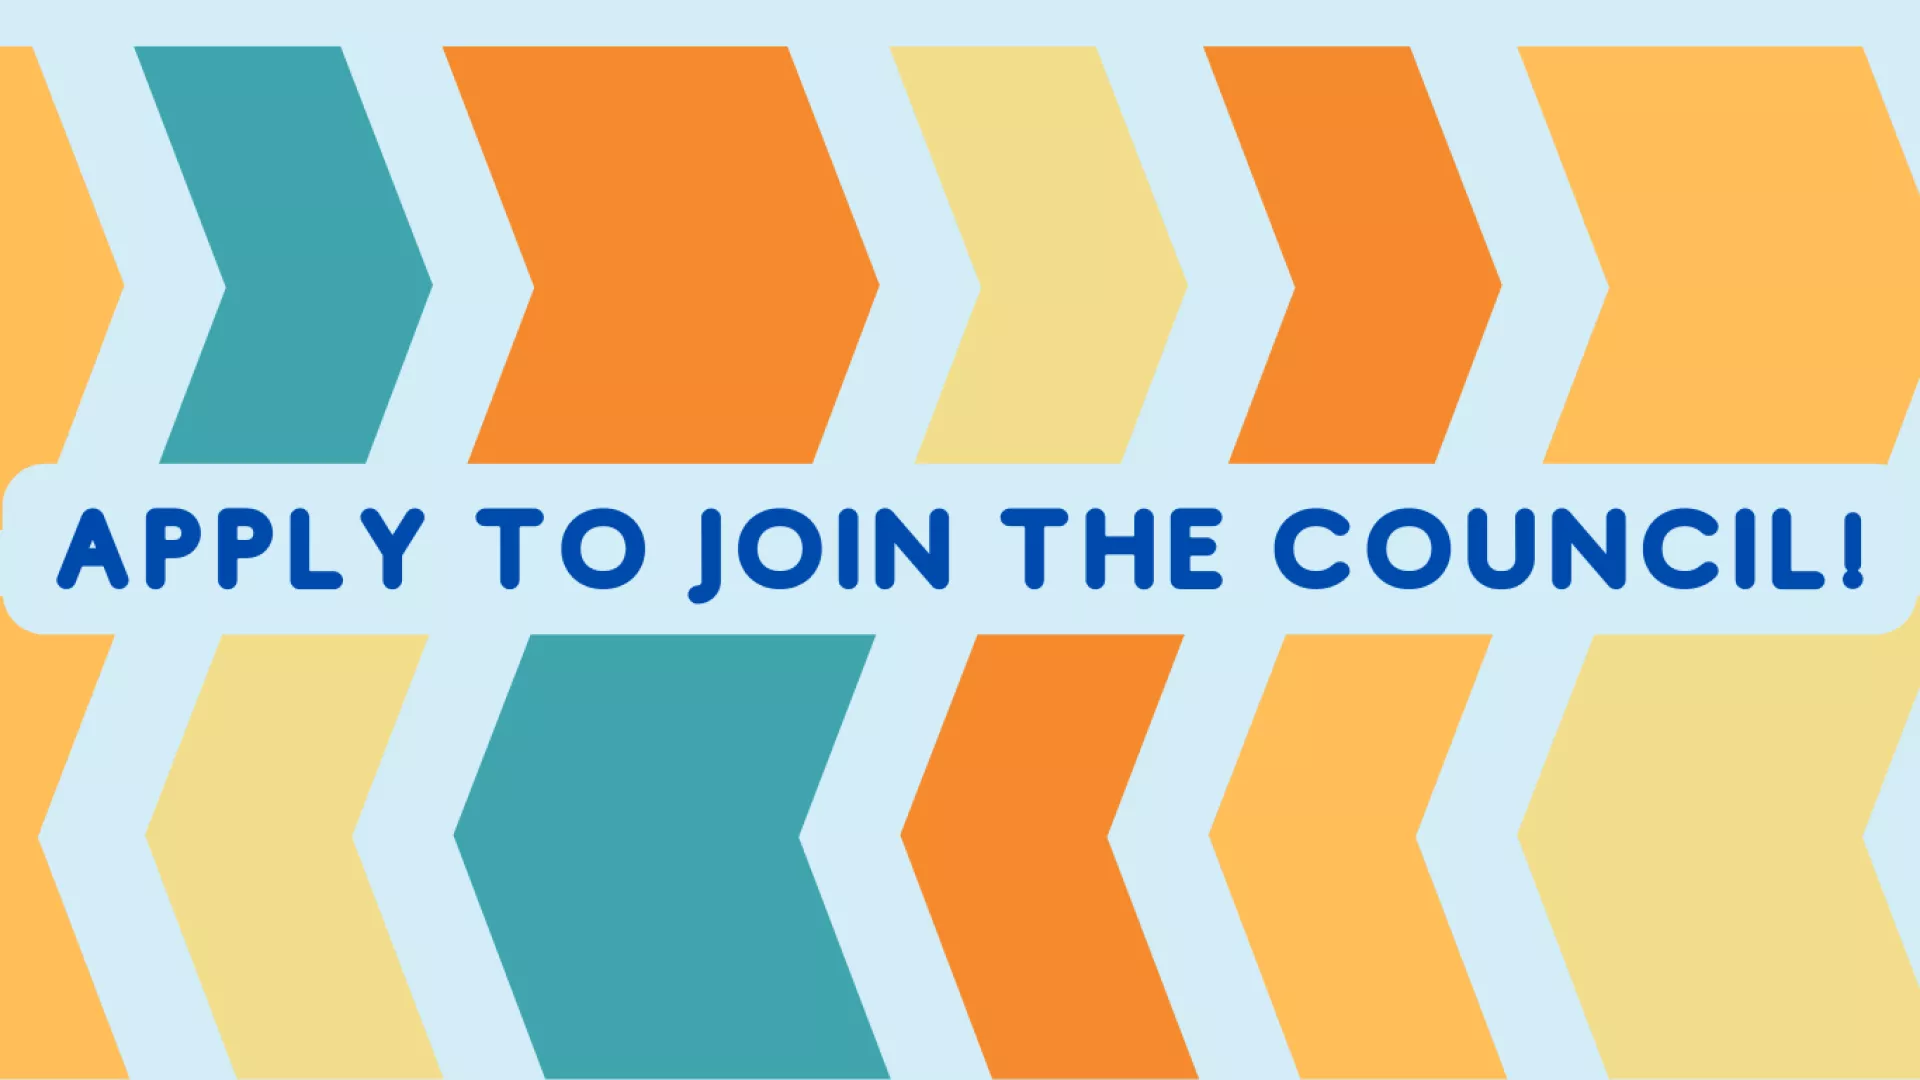 Dark Blue Text "Apply to Join the Council!" on orange, yellow and teal arrow decal on light blue background 